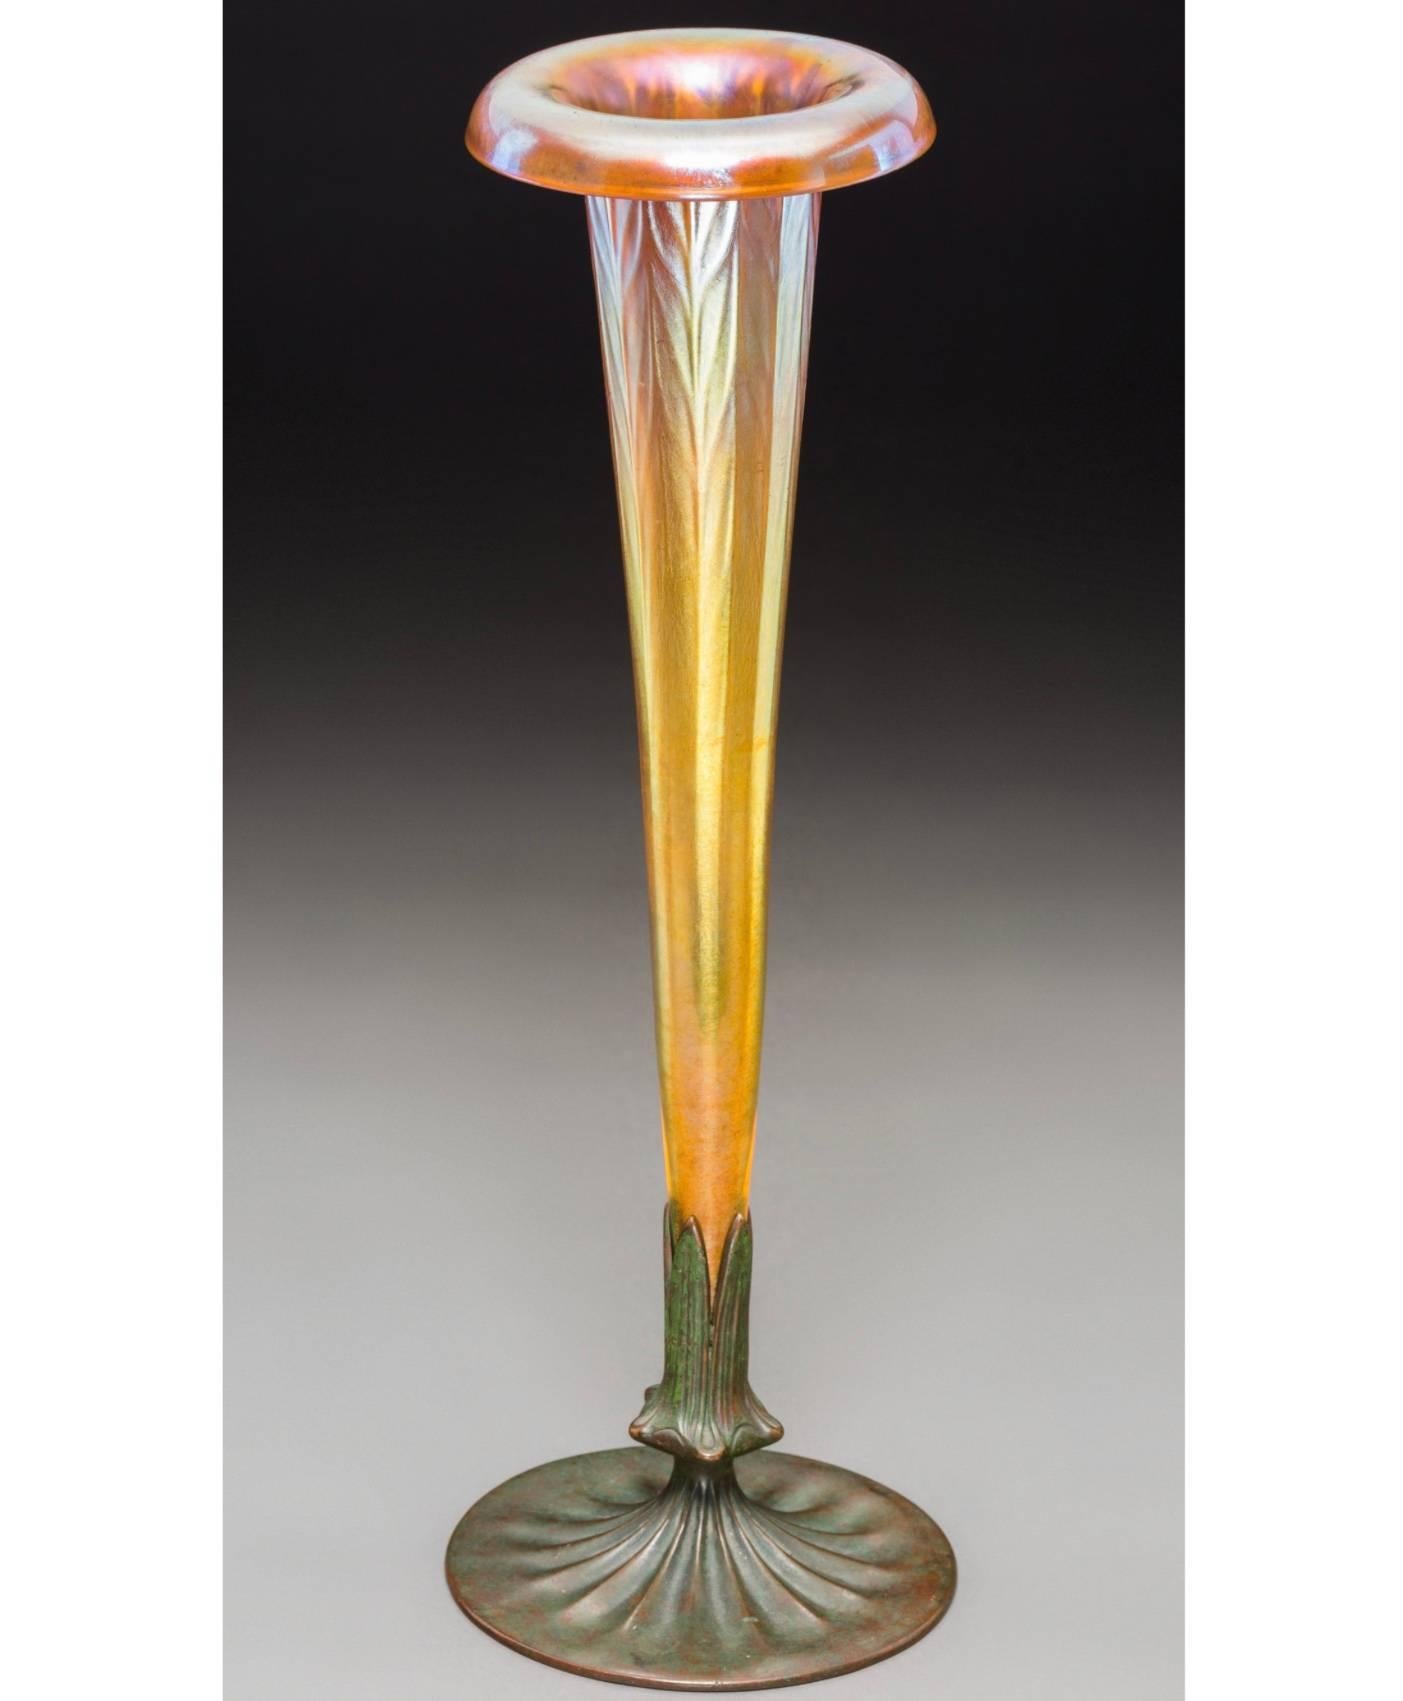 A Tall Iridescent Favrile Patterned and Decorated Tiffany Furnaces Gold Favrile Glass and Bronze Trumpet Vase. Art Nouveau, Art Deco transition, circa 1920-1928. 

Vase Engraved L.C.T 215. Base Stamped with logotype and LOUIS C. TIFFANY